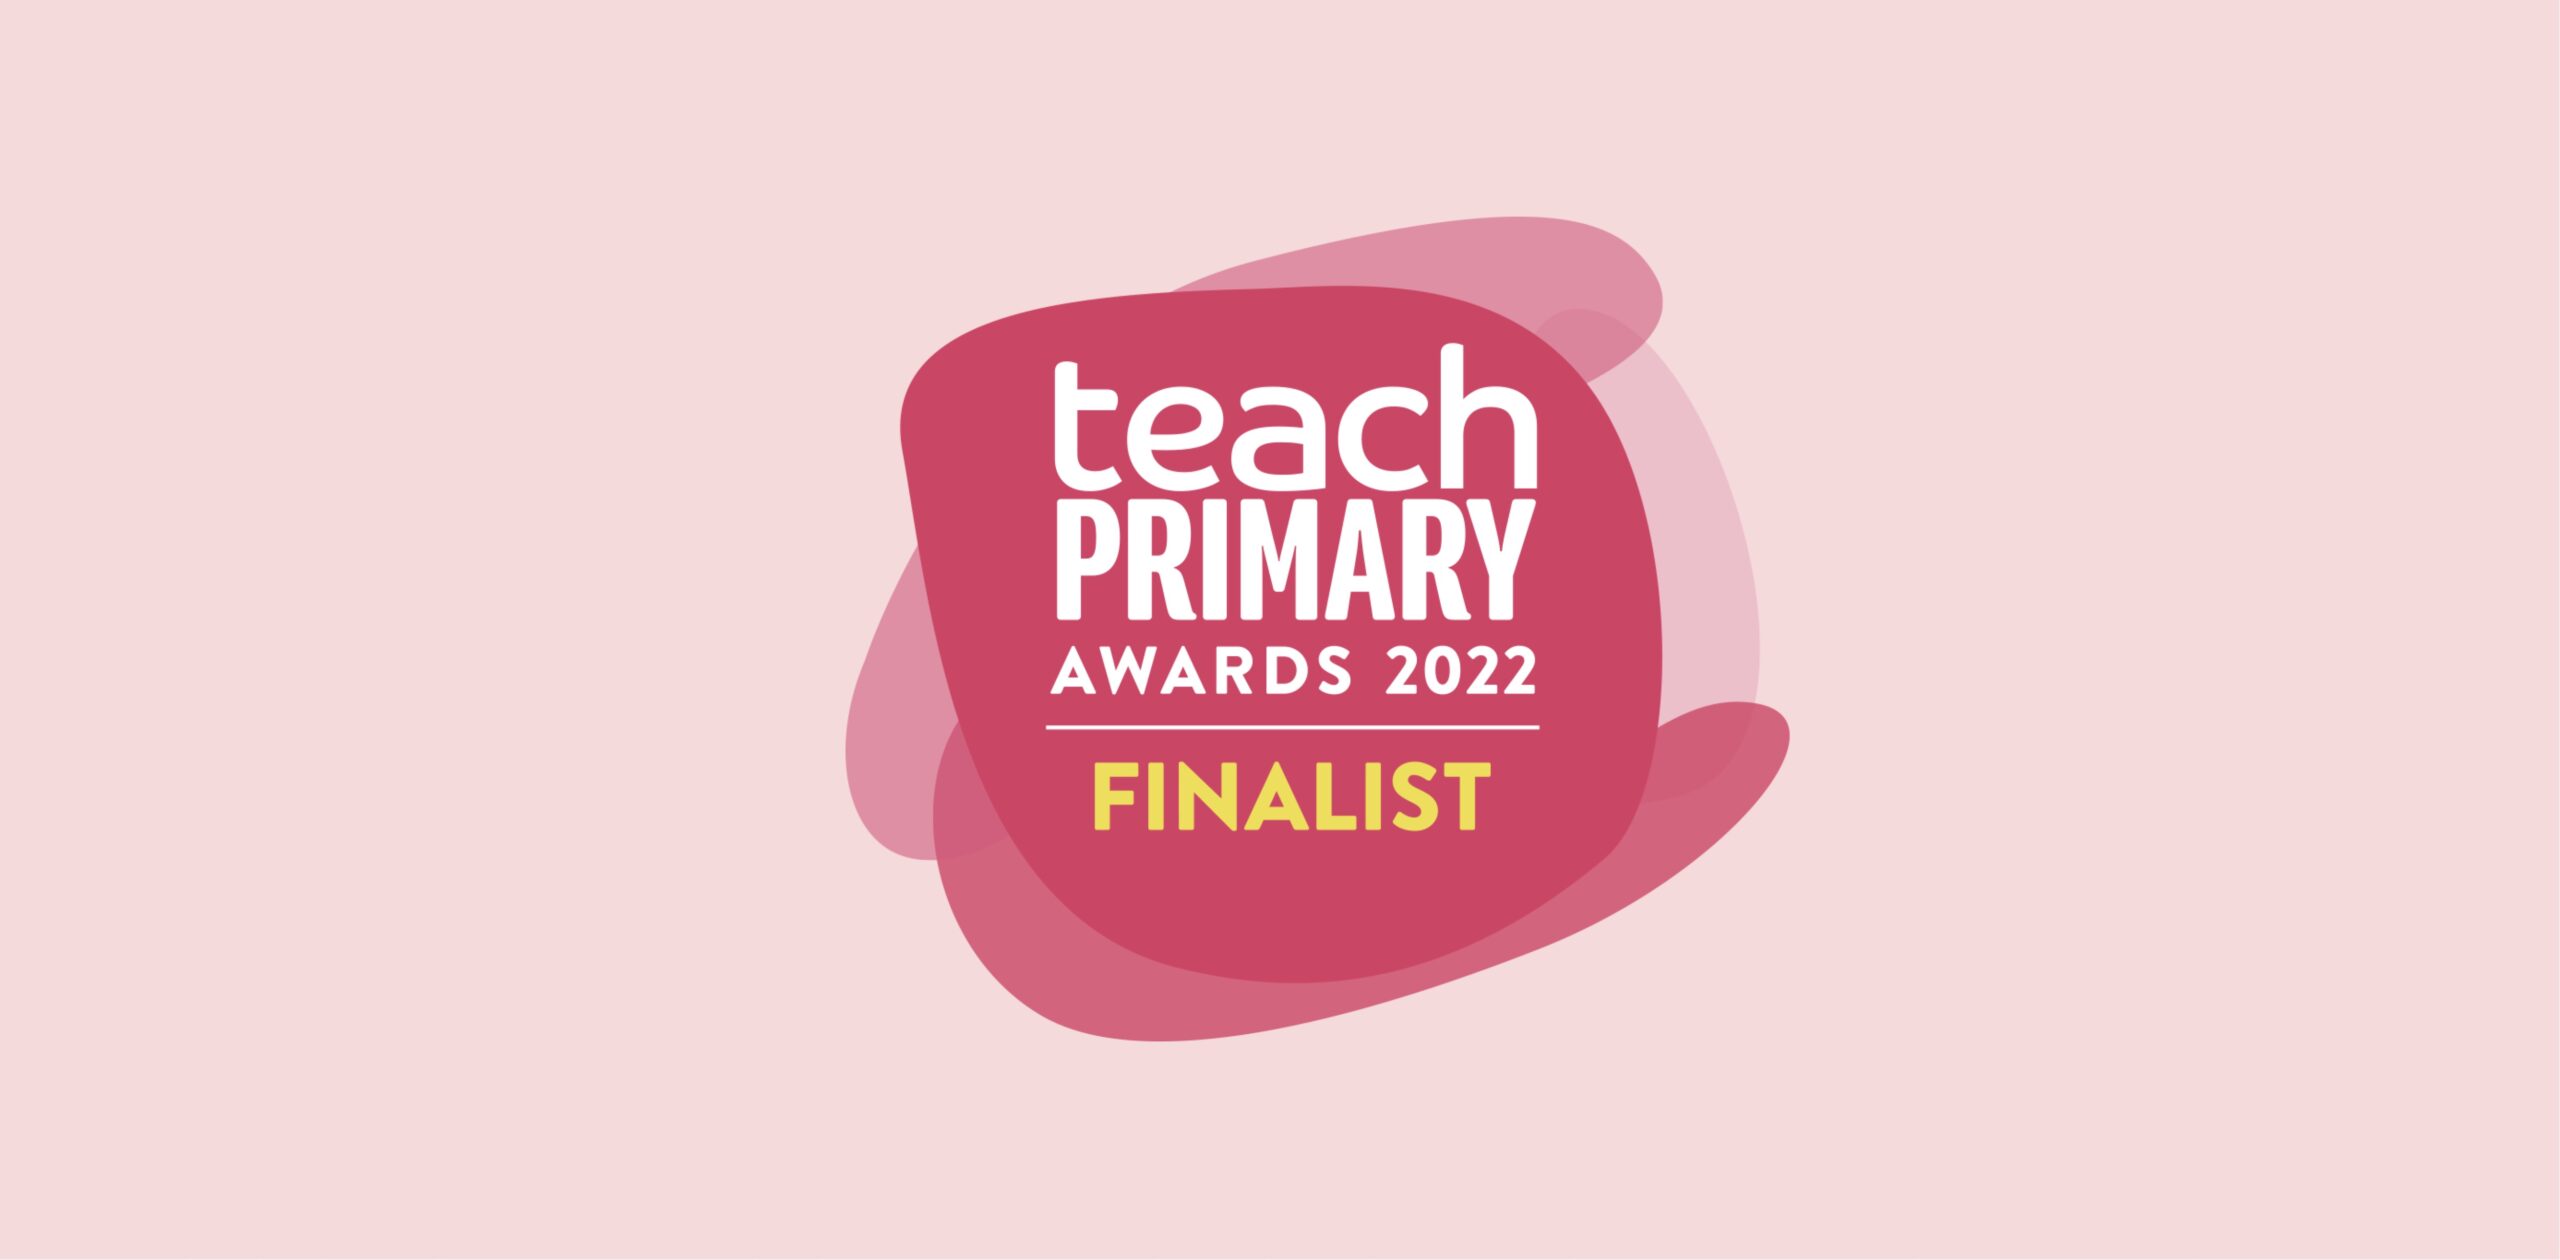 We’re finalists in the Teach Primary Awards!